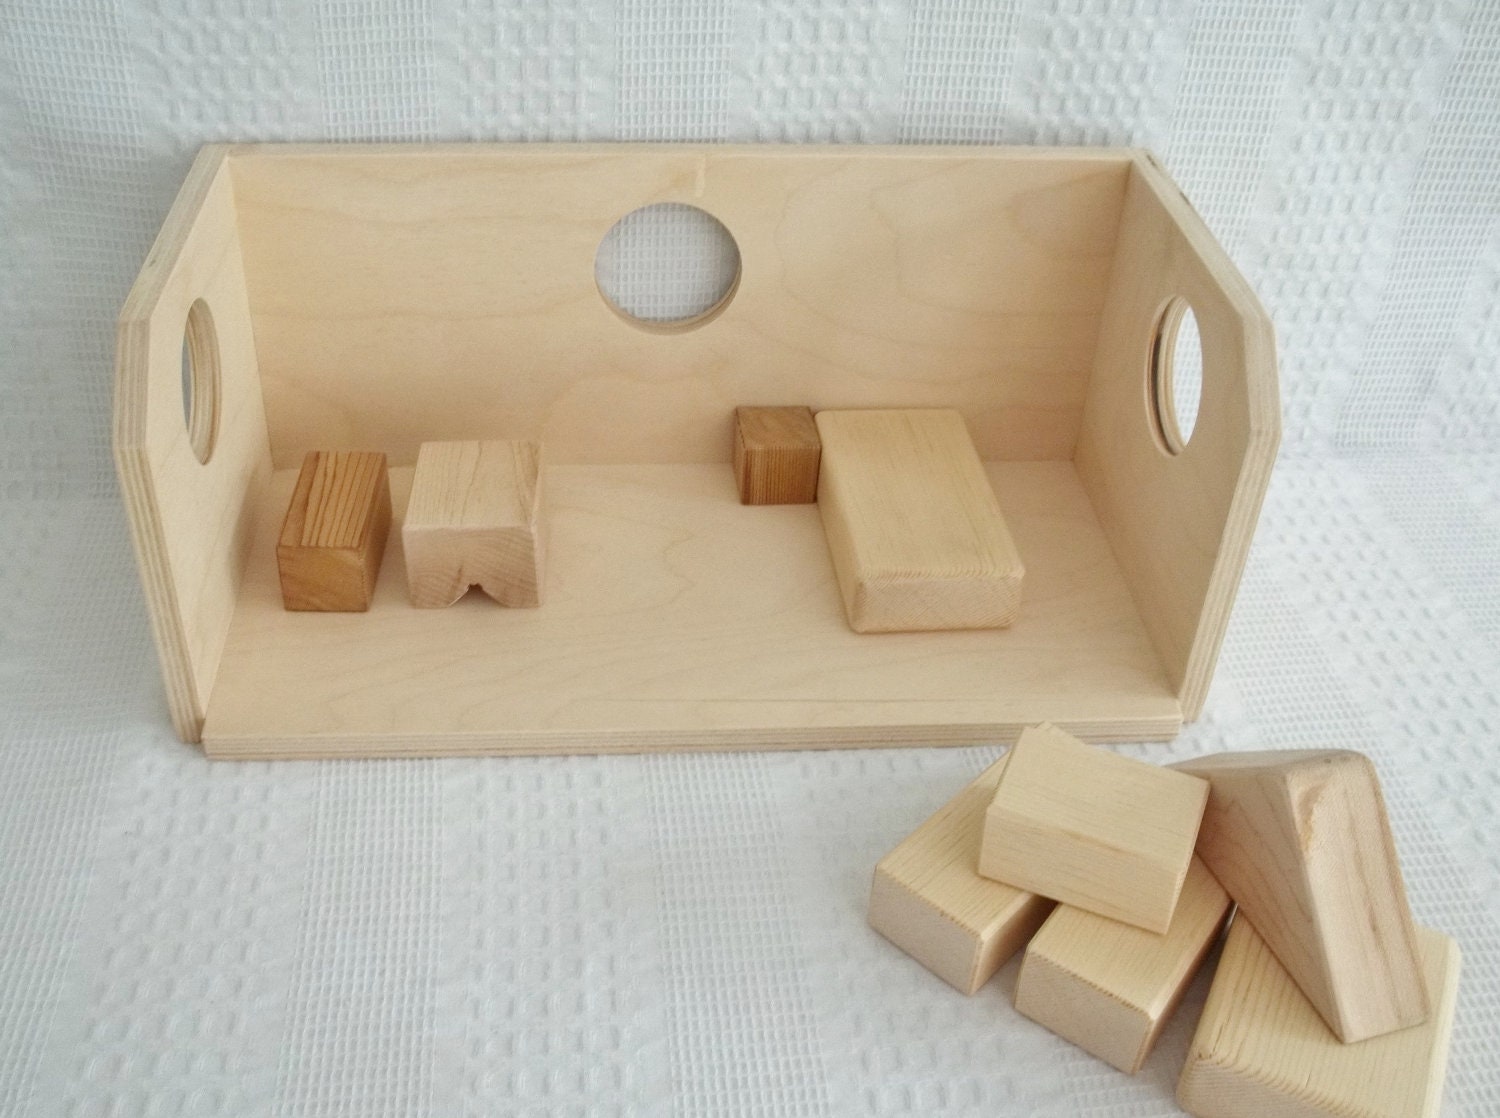 Wood doll house with block furniture to spark your imagination, modern style dollhouse